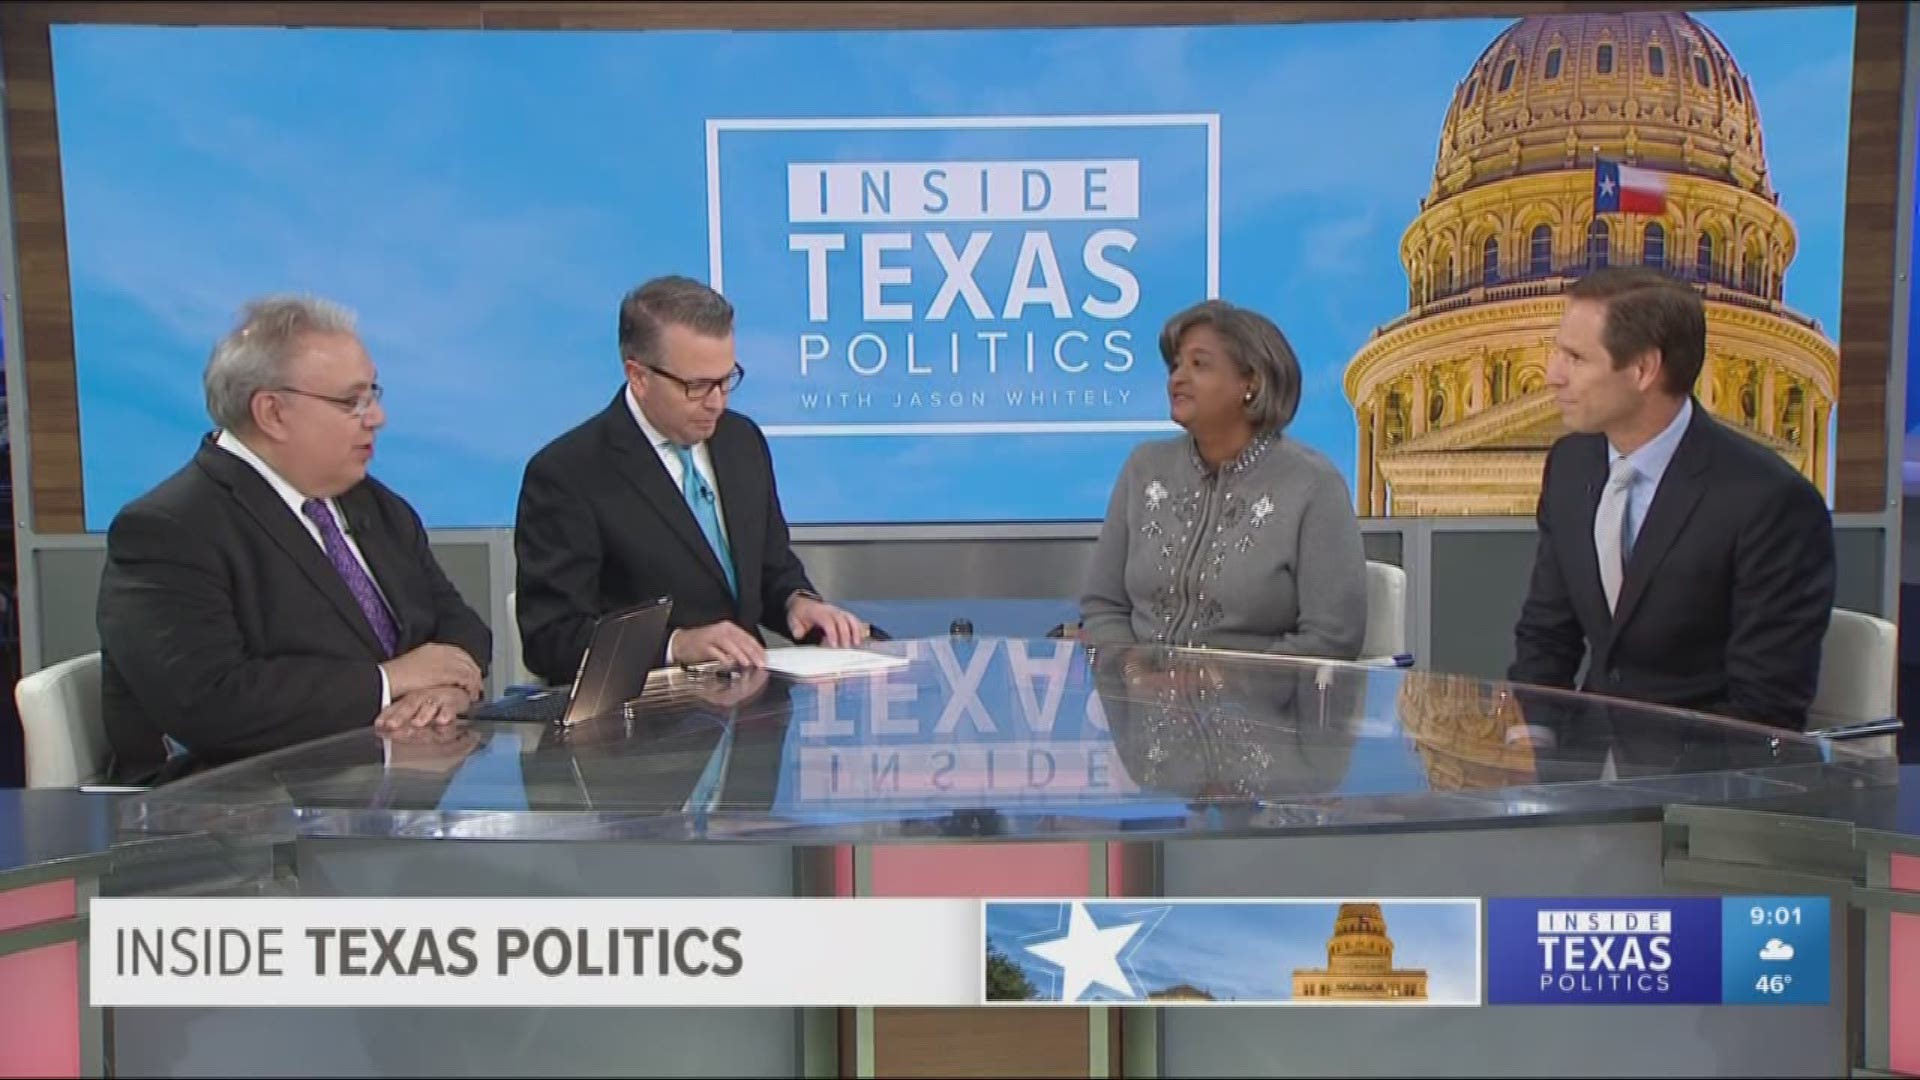 Inside Texas Politics began with two newly elected Democrats who will represent North Texas when the House and Senate reconvene in January. Rhetta Andrews Bowers is state representative-elect for House District 113 - the seat vacated by Republican Cindy B